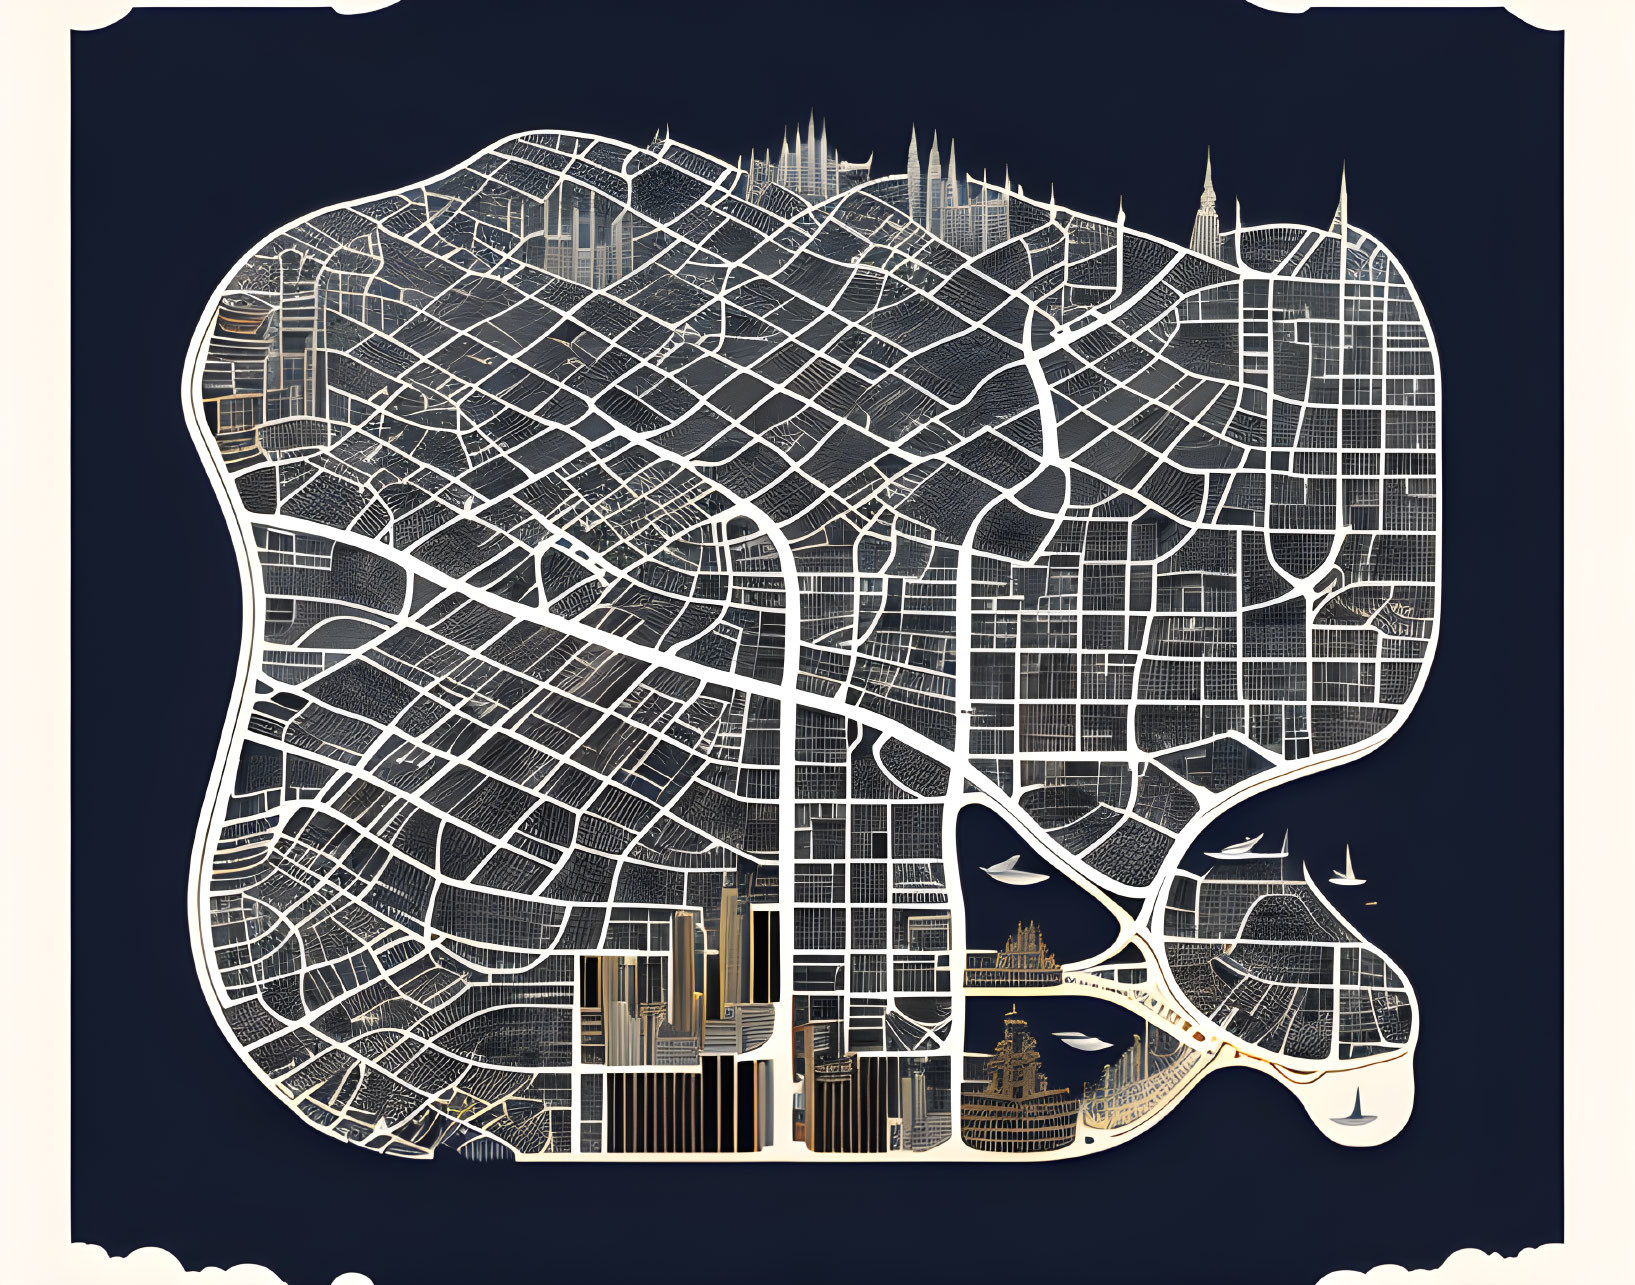 Detailed Gold and White City Map Illustration on Navy Background